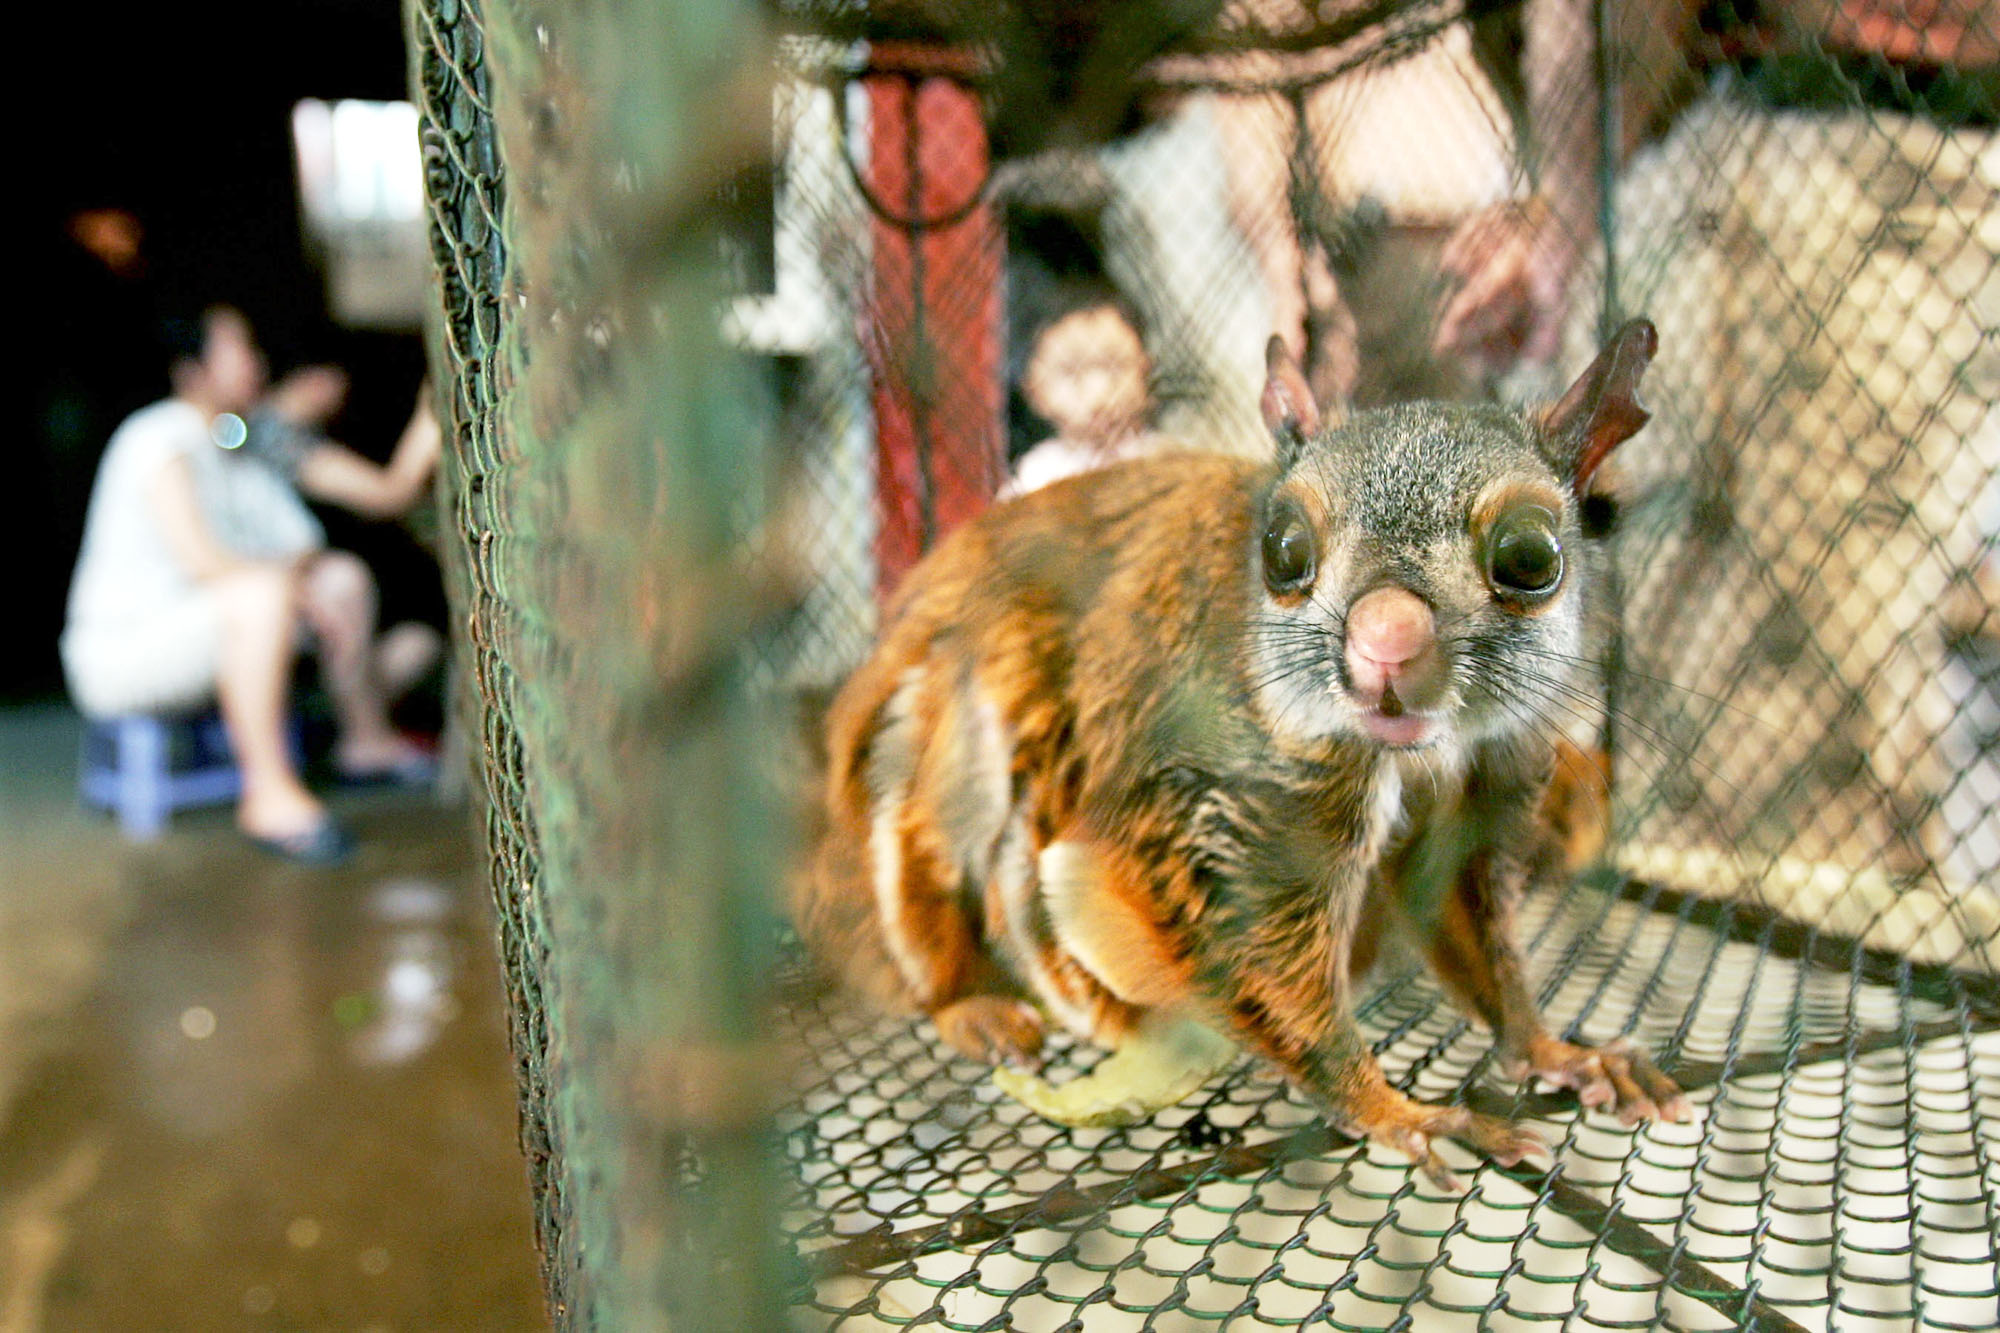 PHOTO: A flying squirrel sits inside a cage for sale at a market in the Baiyun district in China's southern city of Guangzhou  Sept. 16, 2004.